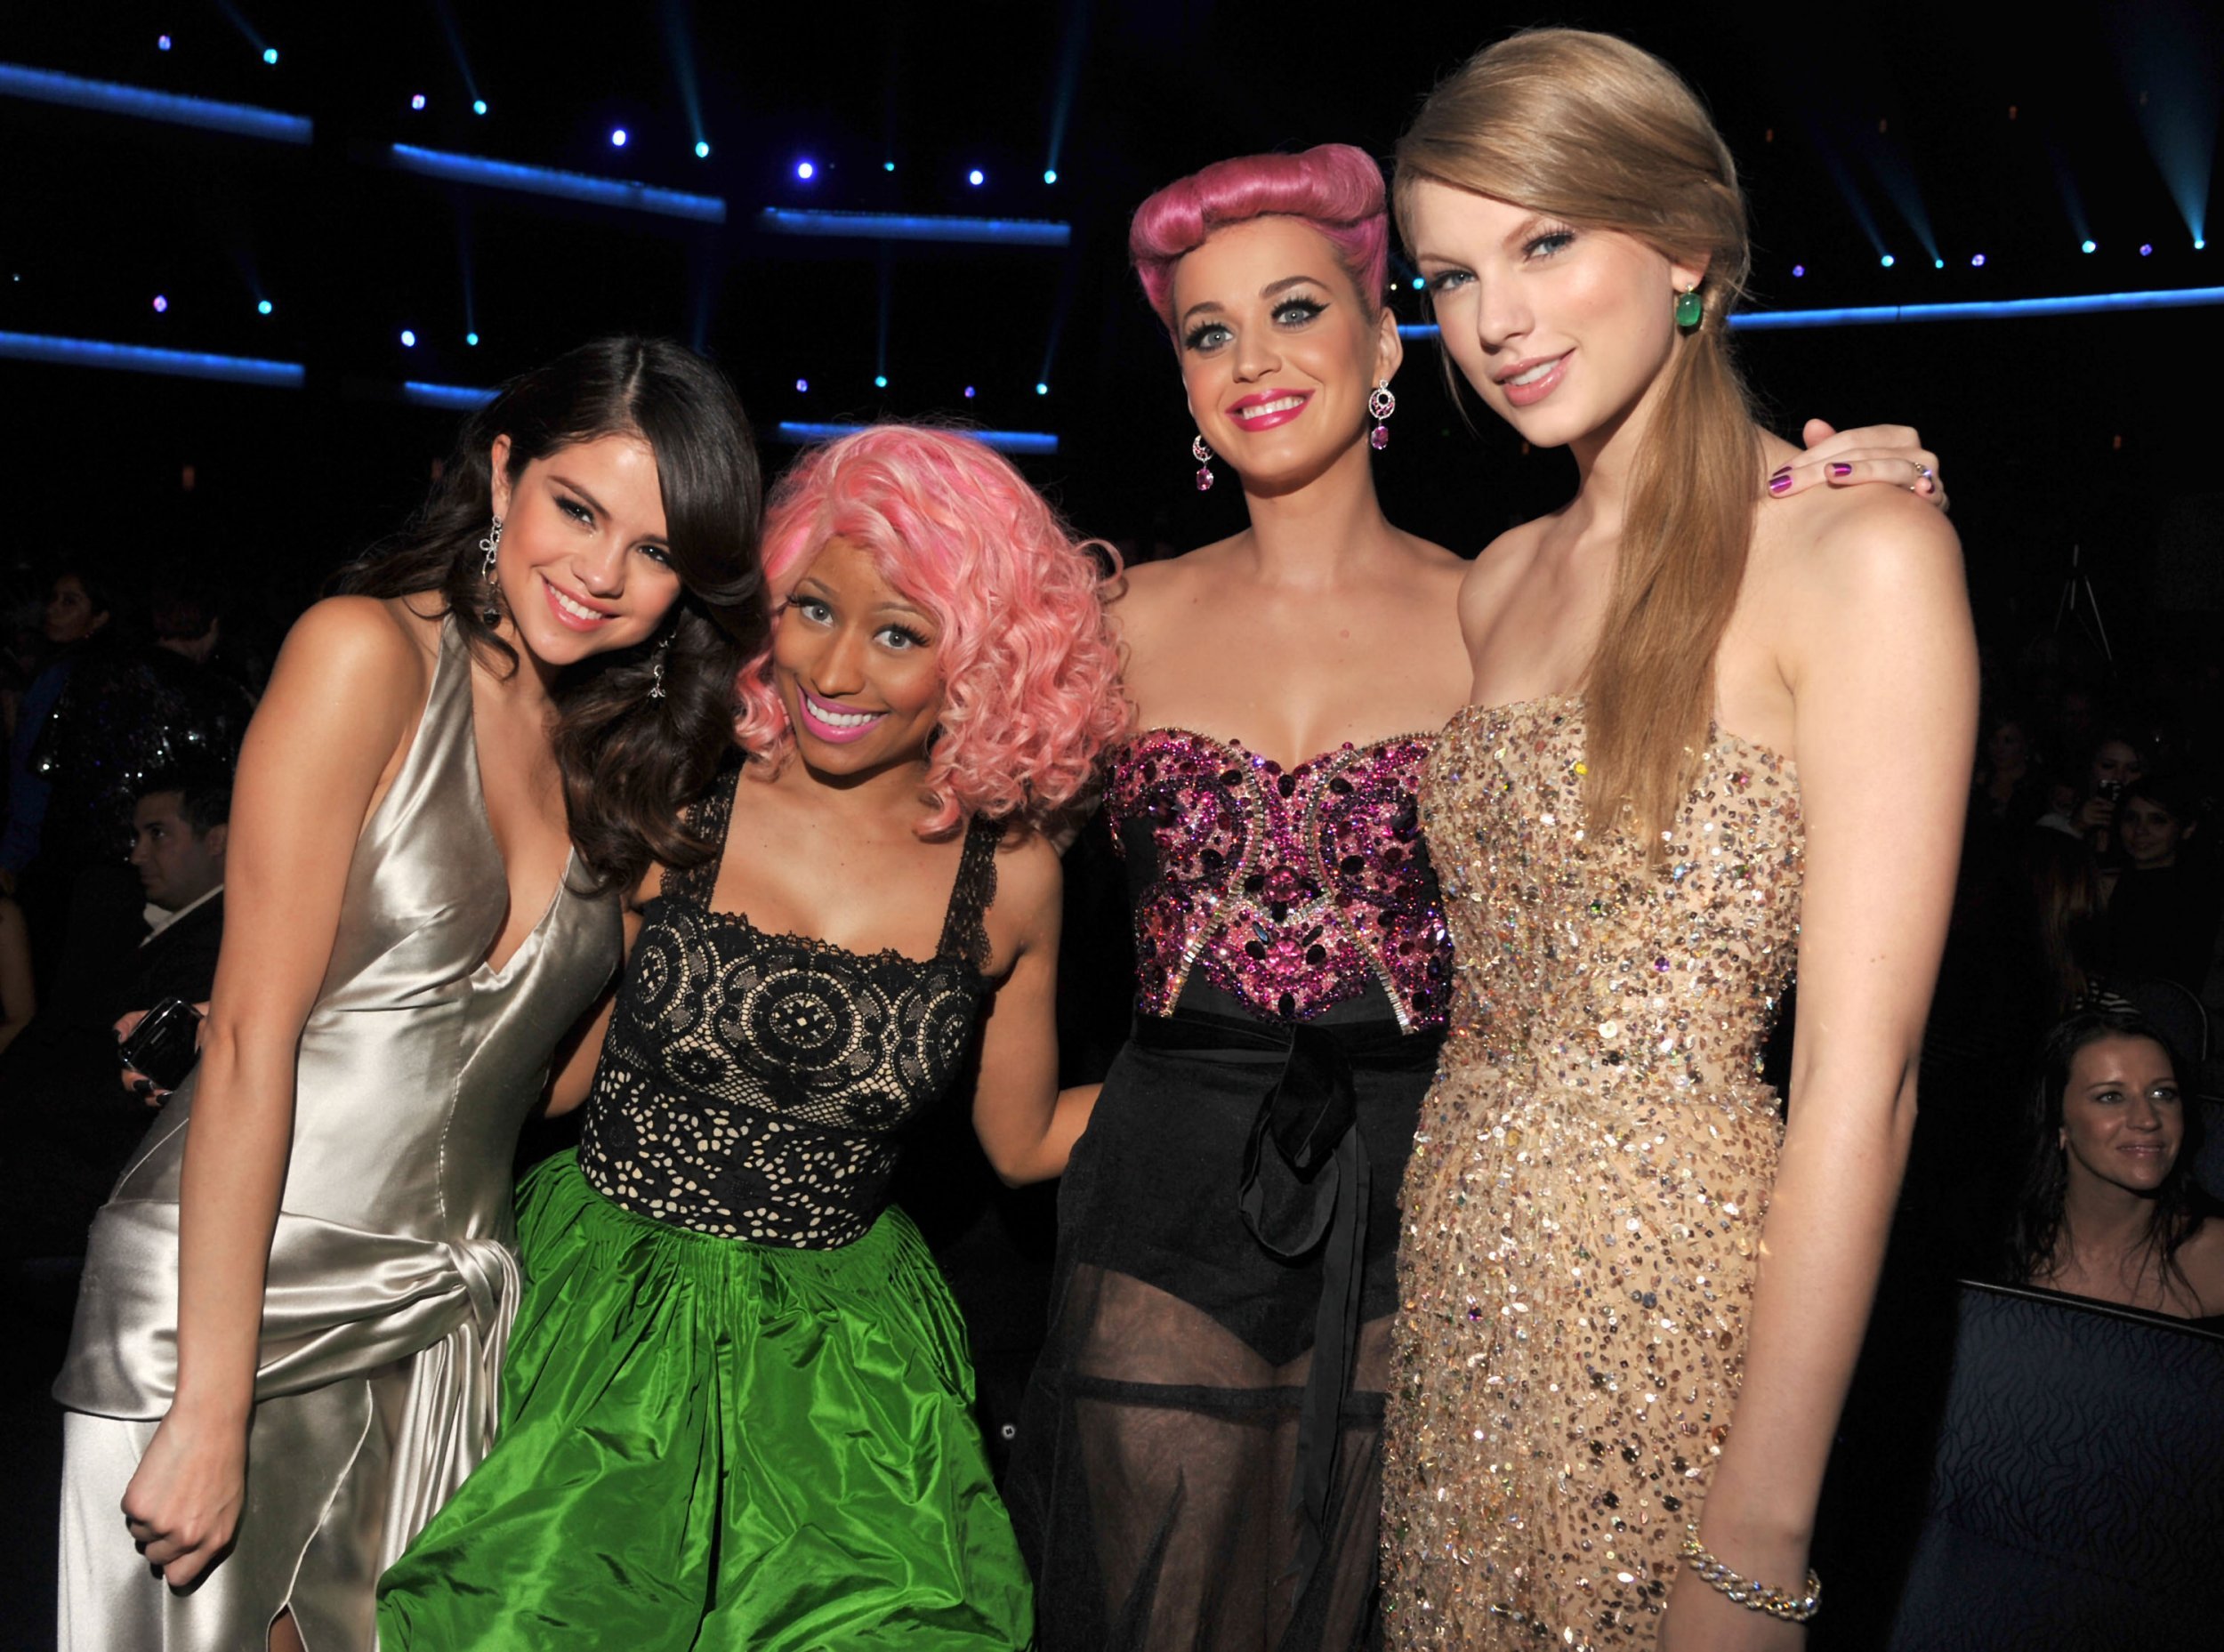 LOS ANGELES, CA - NOVEMBER 20: (L-R) Singers Selena Gomez, Nicki Minaj, Katy Perry and Taylor Swift at the 2011 American Music Awards held at Nokia Theatre L.A. LIVE on November 20, 2011 in Los Angeles, California. (Photo by Lester Cohen/AMA2011/WireImage)